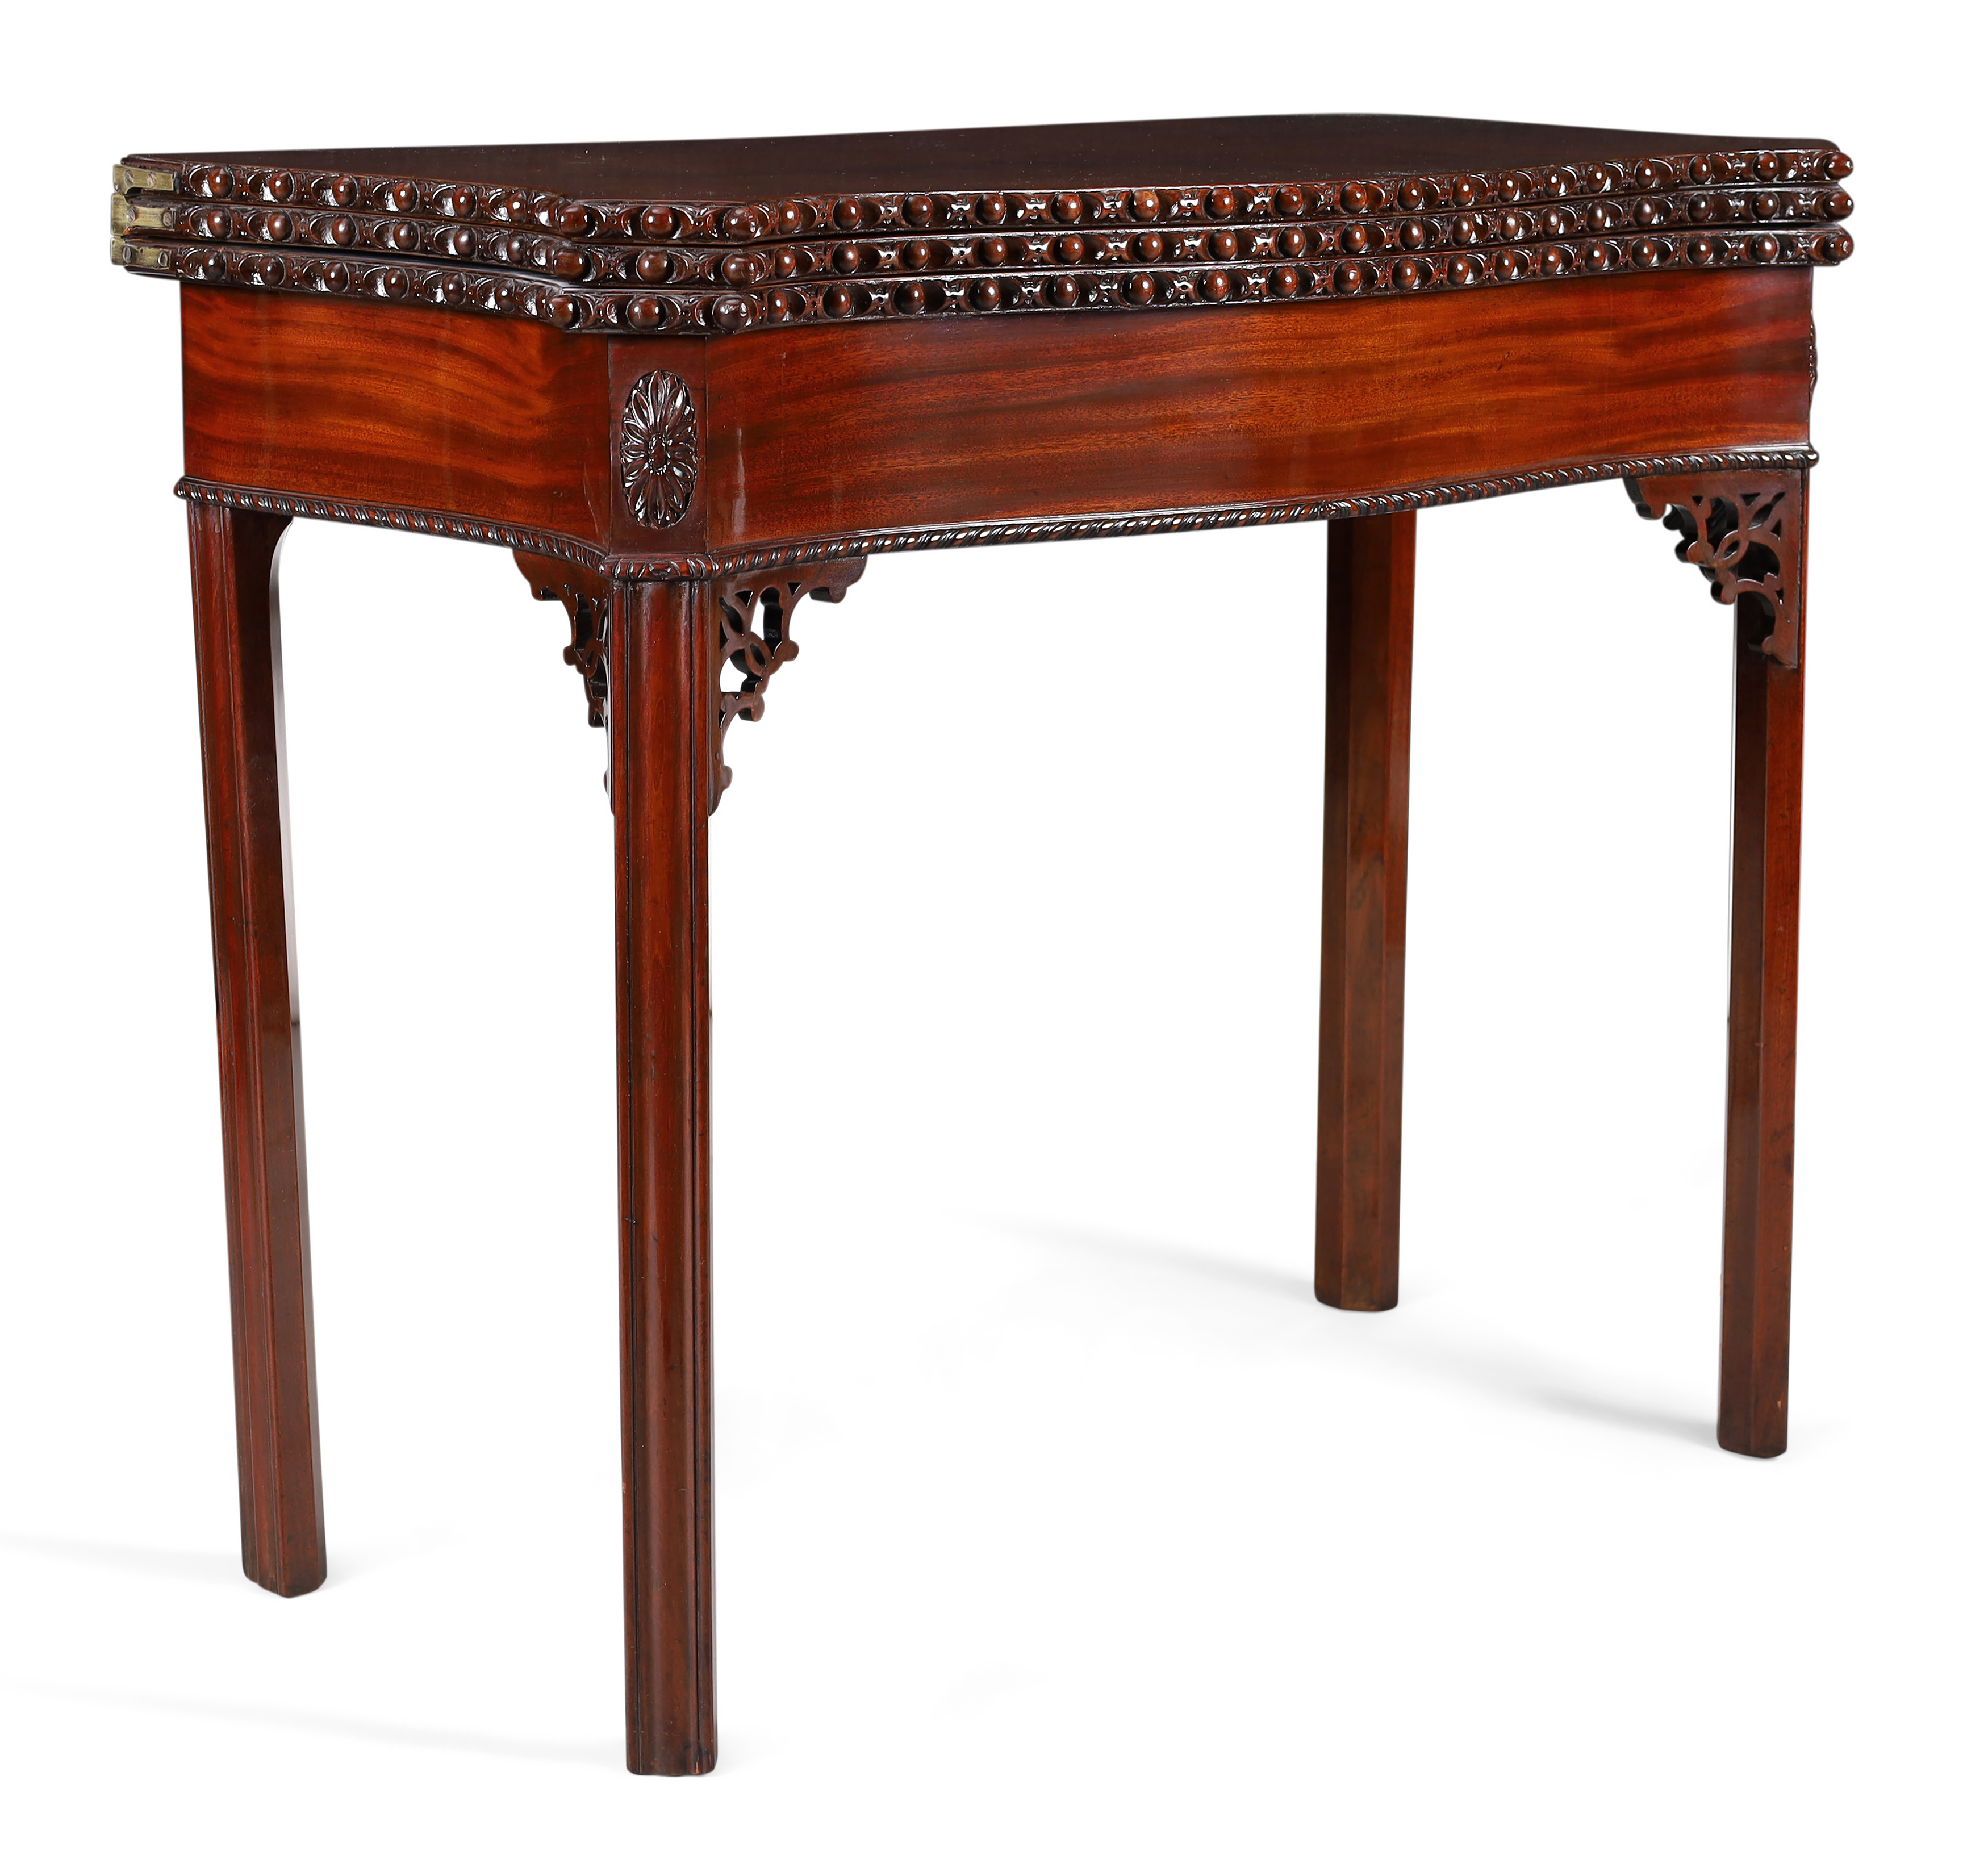 A George II mahogany serpentine front triple fold tea/card table, in the manner of Thomas Chippen...